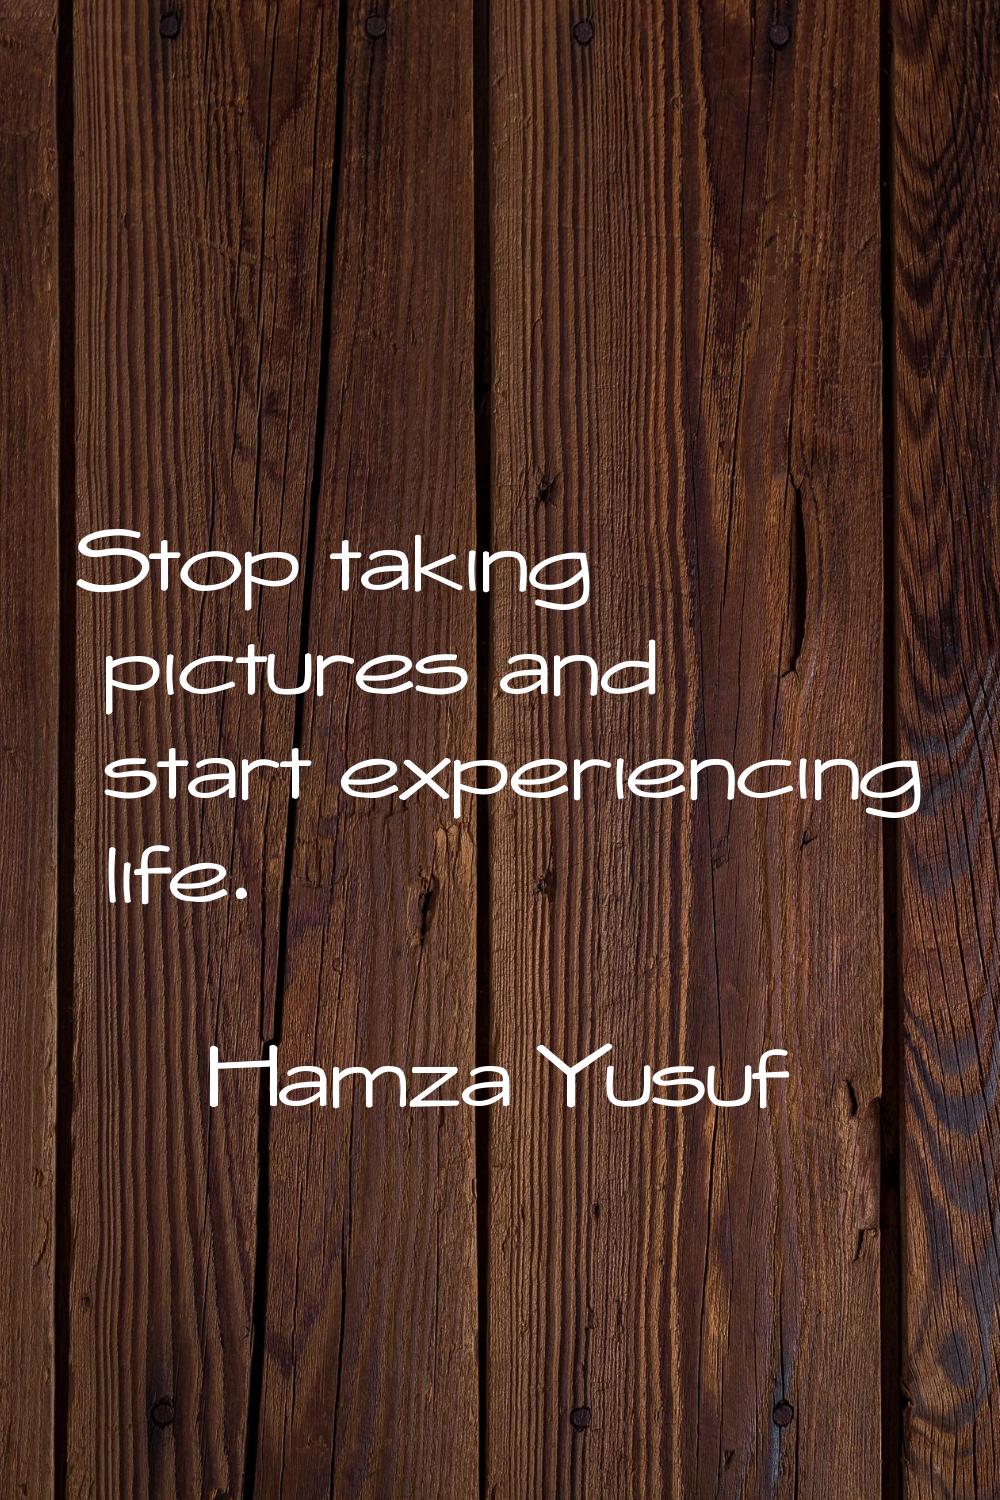 Stop taking pictures and start experiencing life.